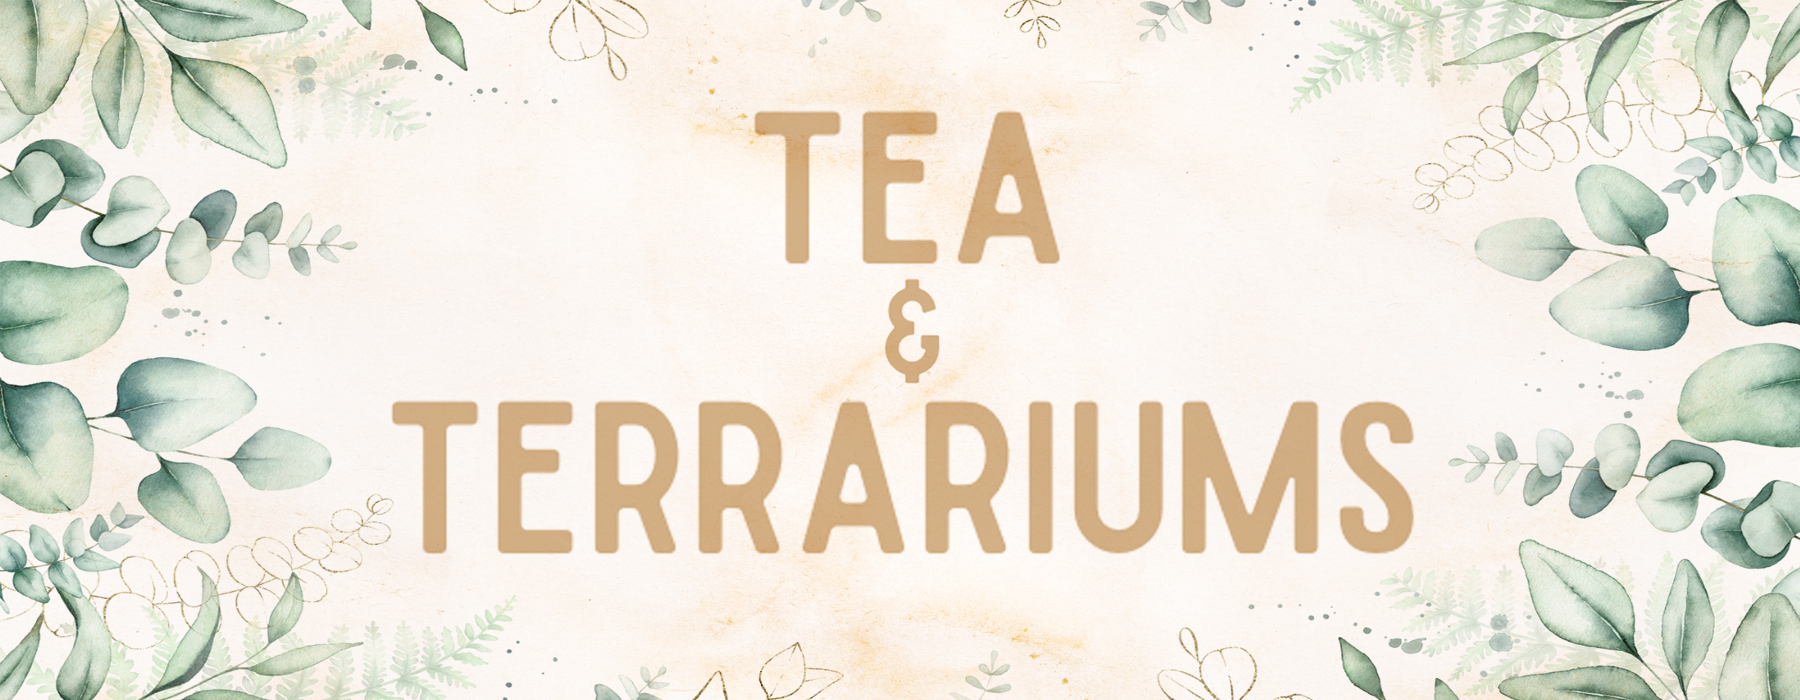 Abby's Garden Parties and Tilly's Tea & Terrariums Mother's Day Event Banner